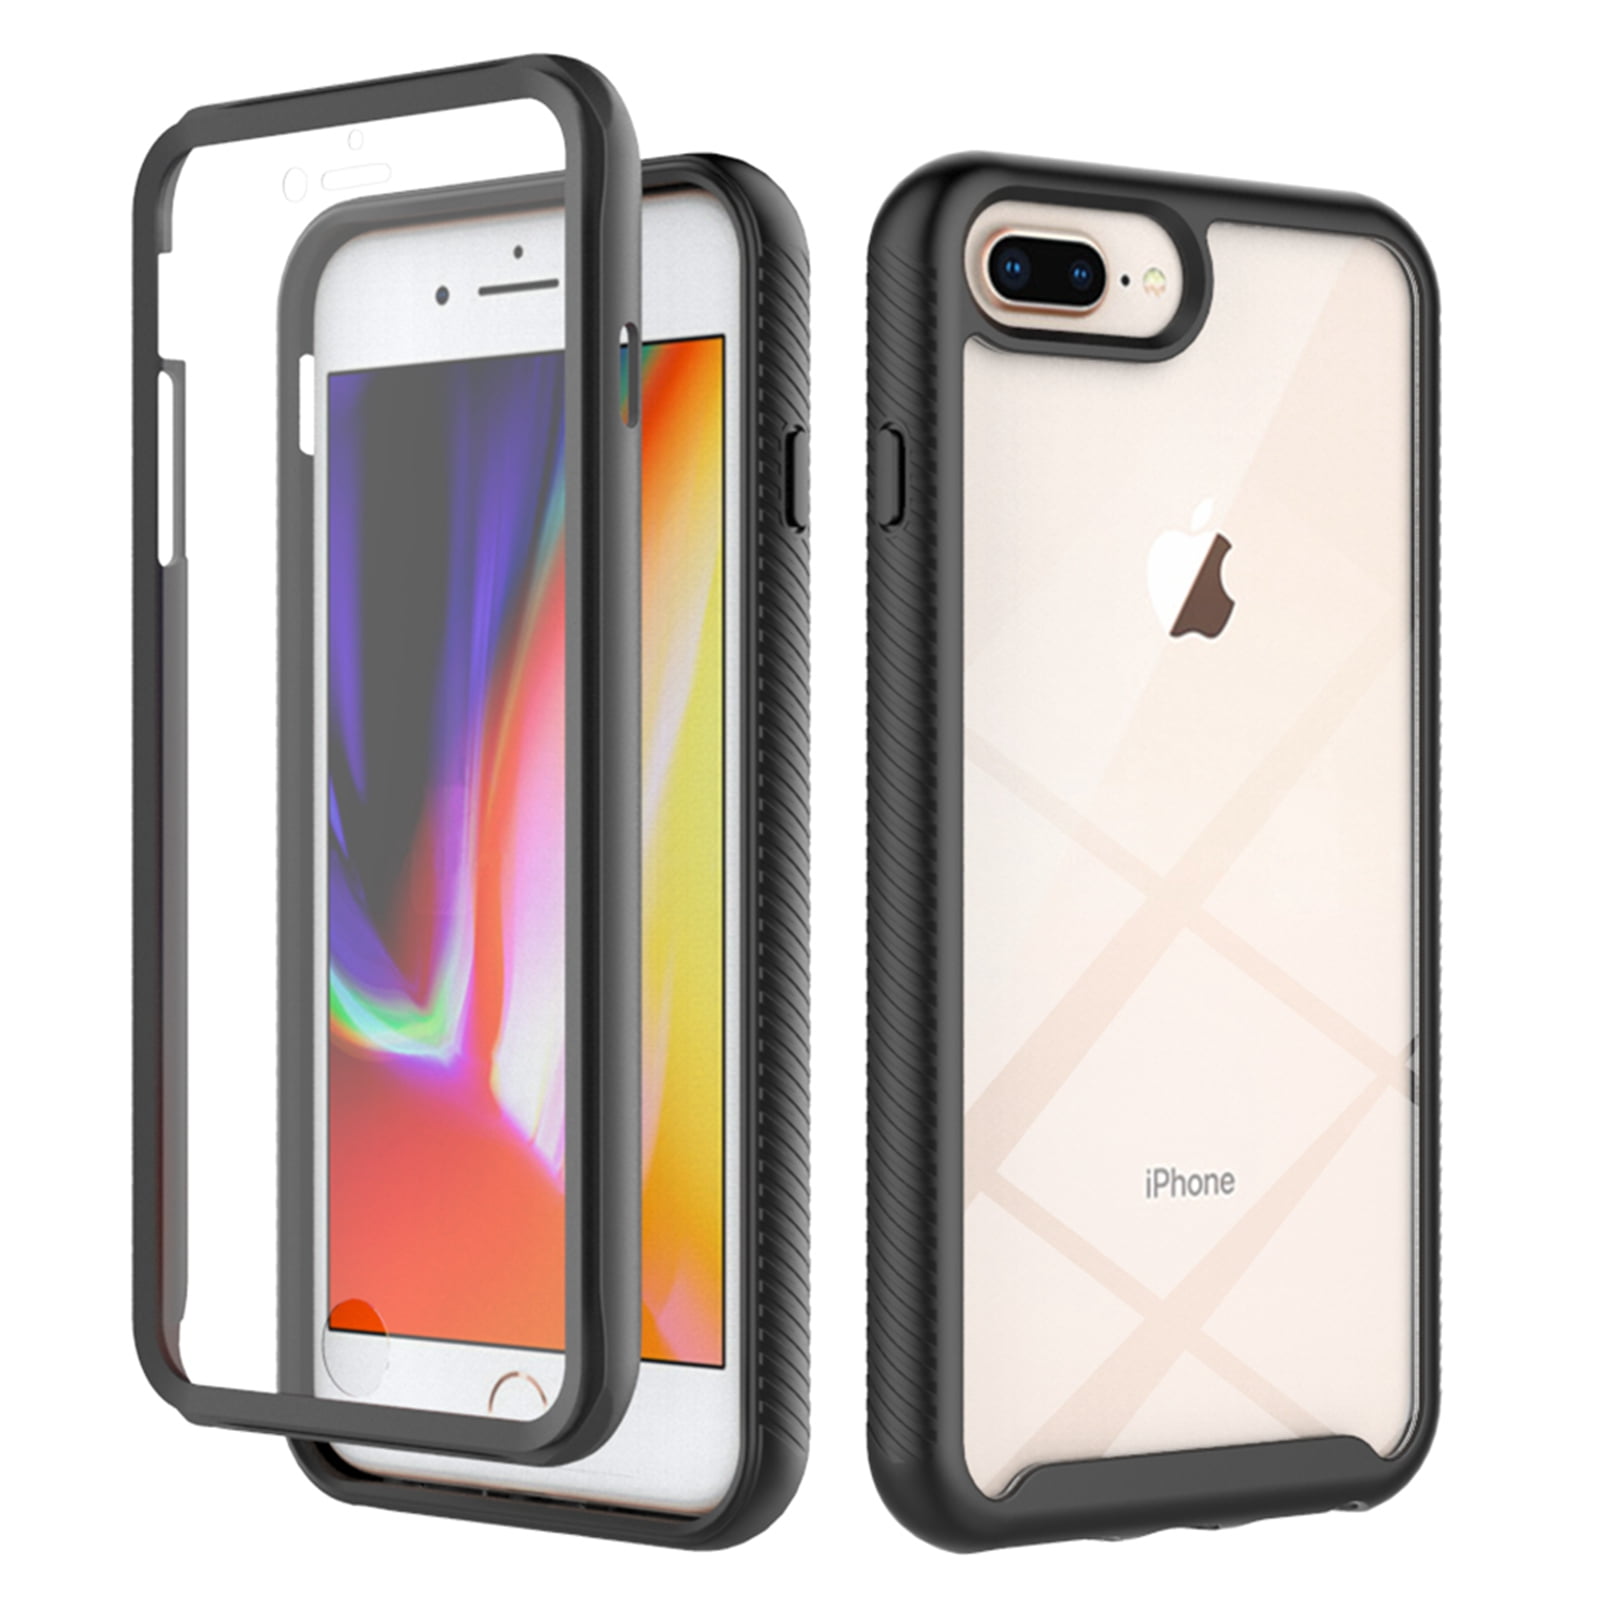 IDweel iPhone 8 Plus Case, iPhone 7 Plus Case, Full-Body Durable Shockproof Case with Build in Screen Protector Heavy Duty Shock Resistant Hybrid